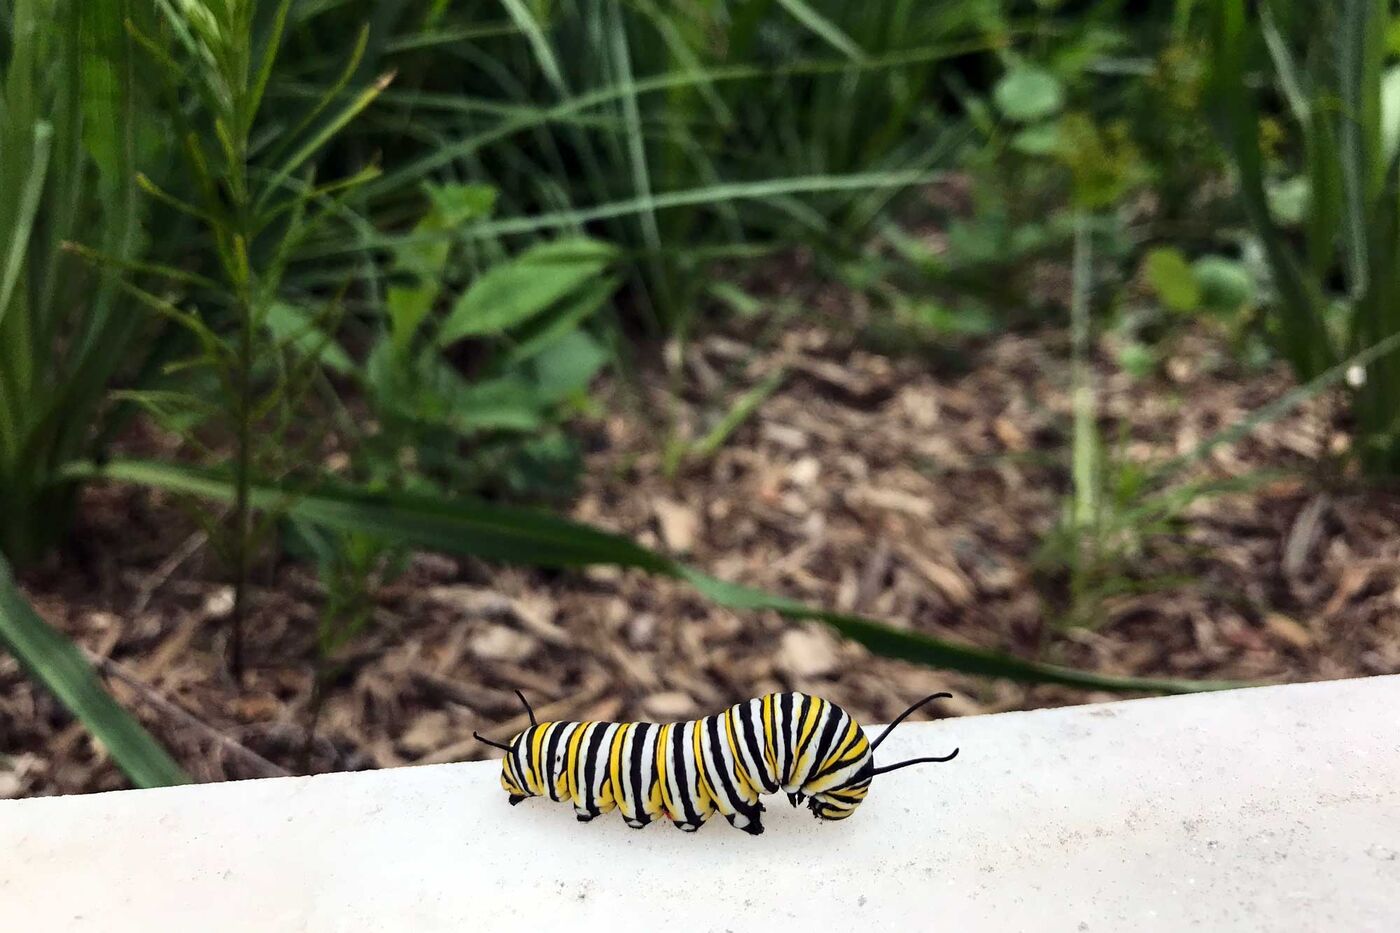 A yellow, black, and white striped caterpillar on a stone ledge, with green plants growing the bed just behind it.